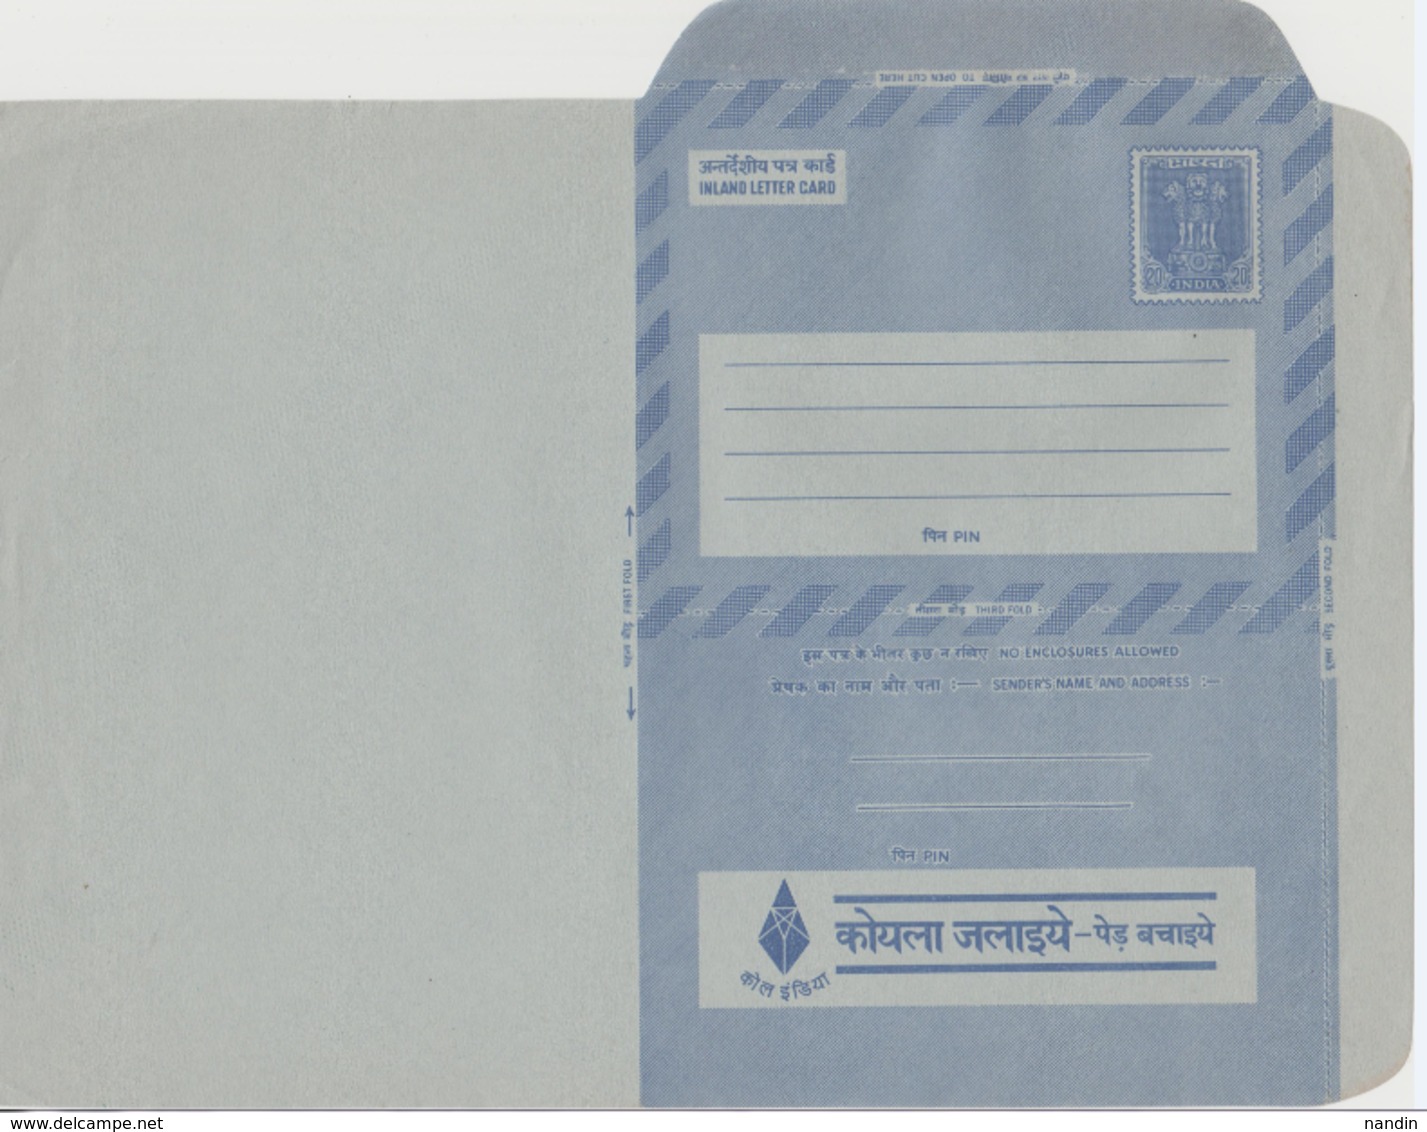 INDIA POSTAL STATIONERY INLAND LETTER CARD.20P  ADVERTISEMENT  COAL INDIA (Hindi)  USE COAL SAVE TREE. .ECOLOGY - Inland Letter Cards